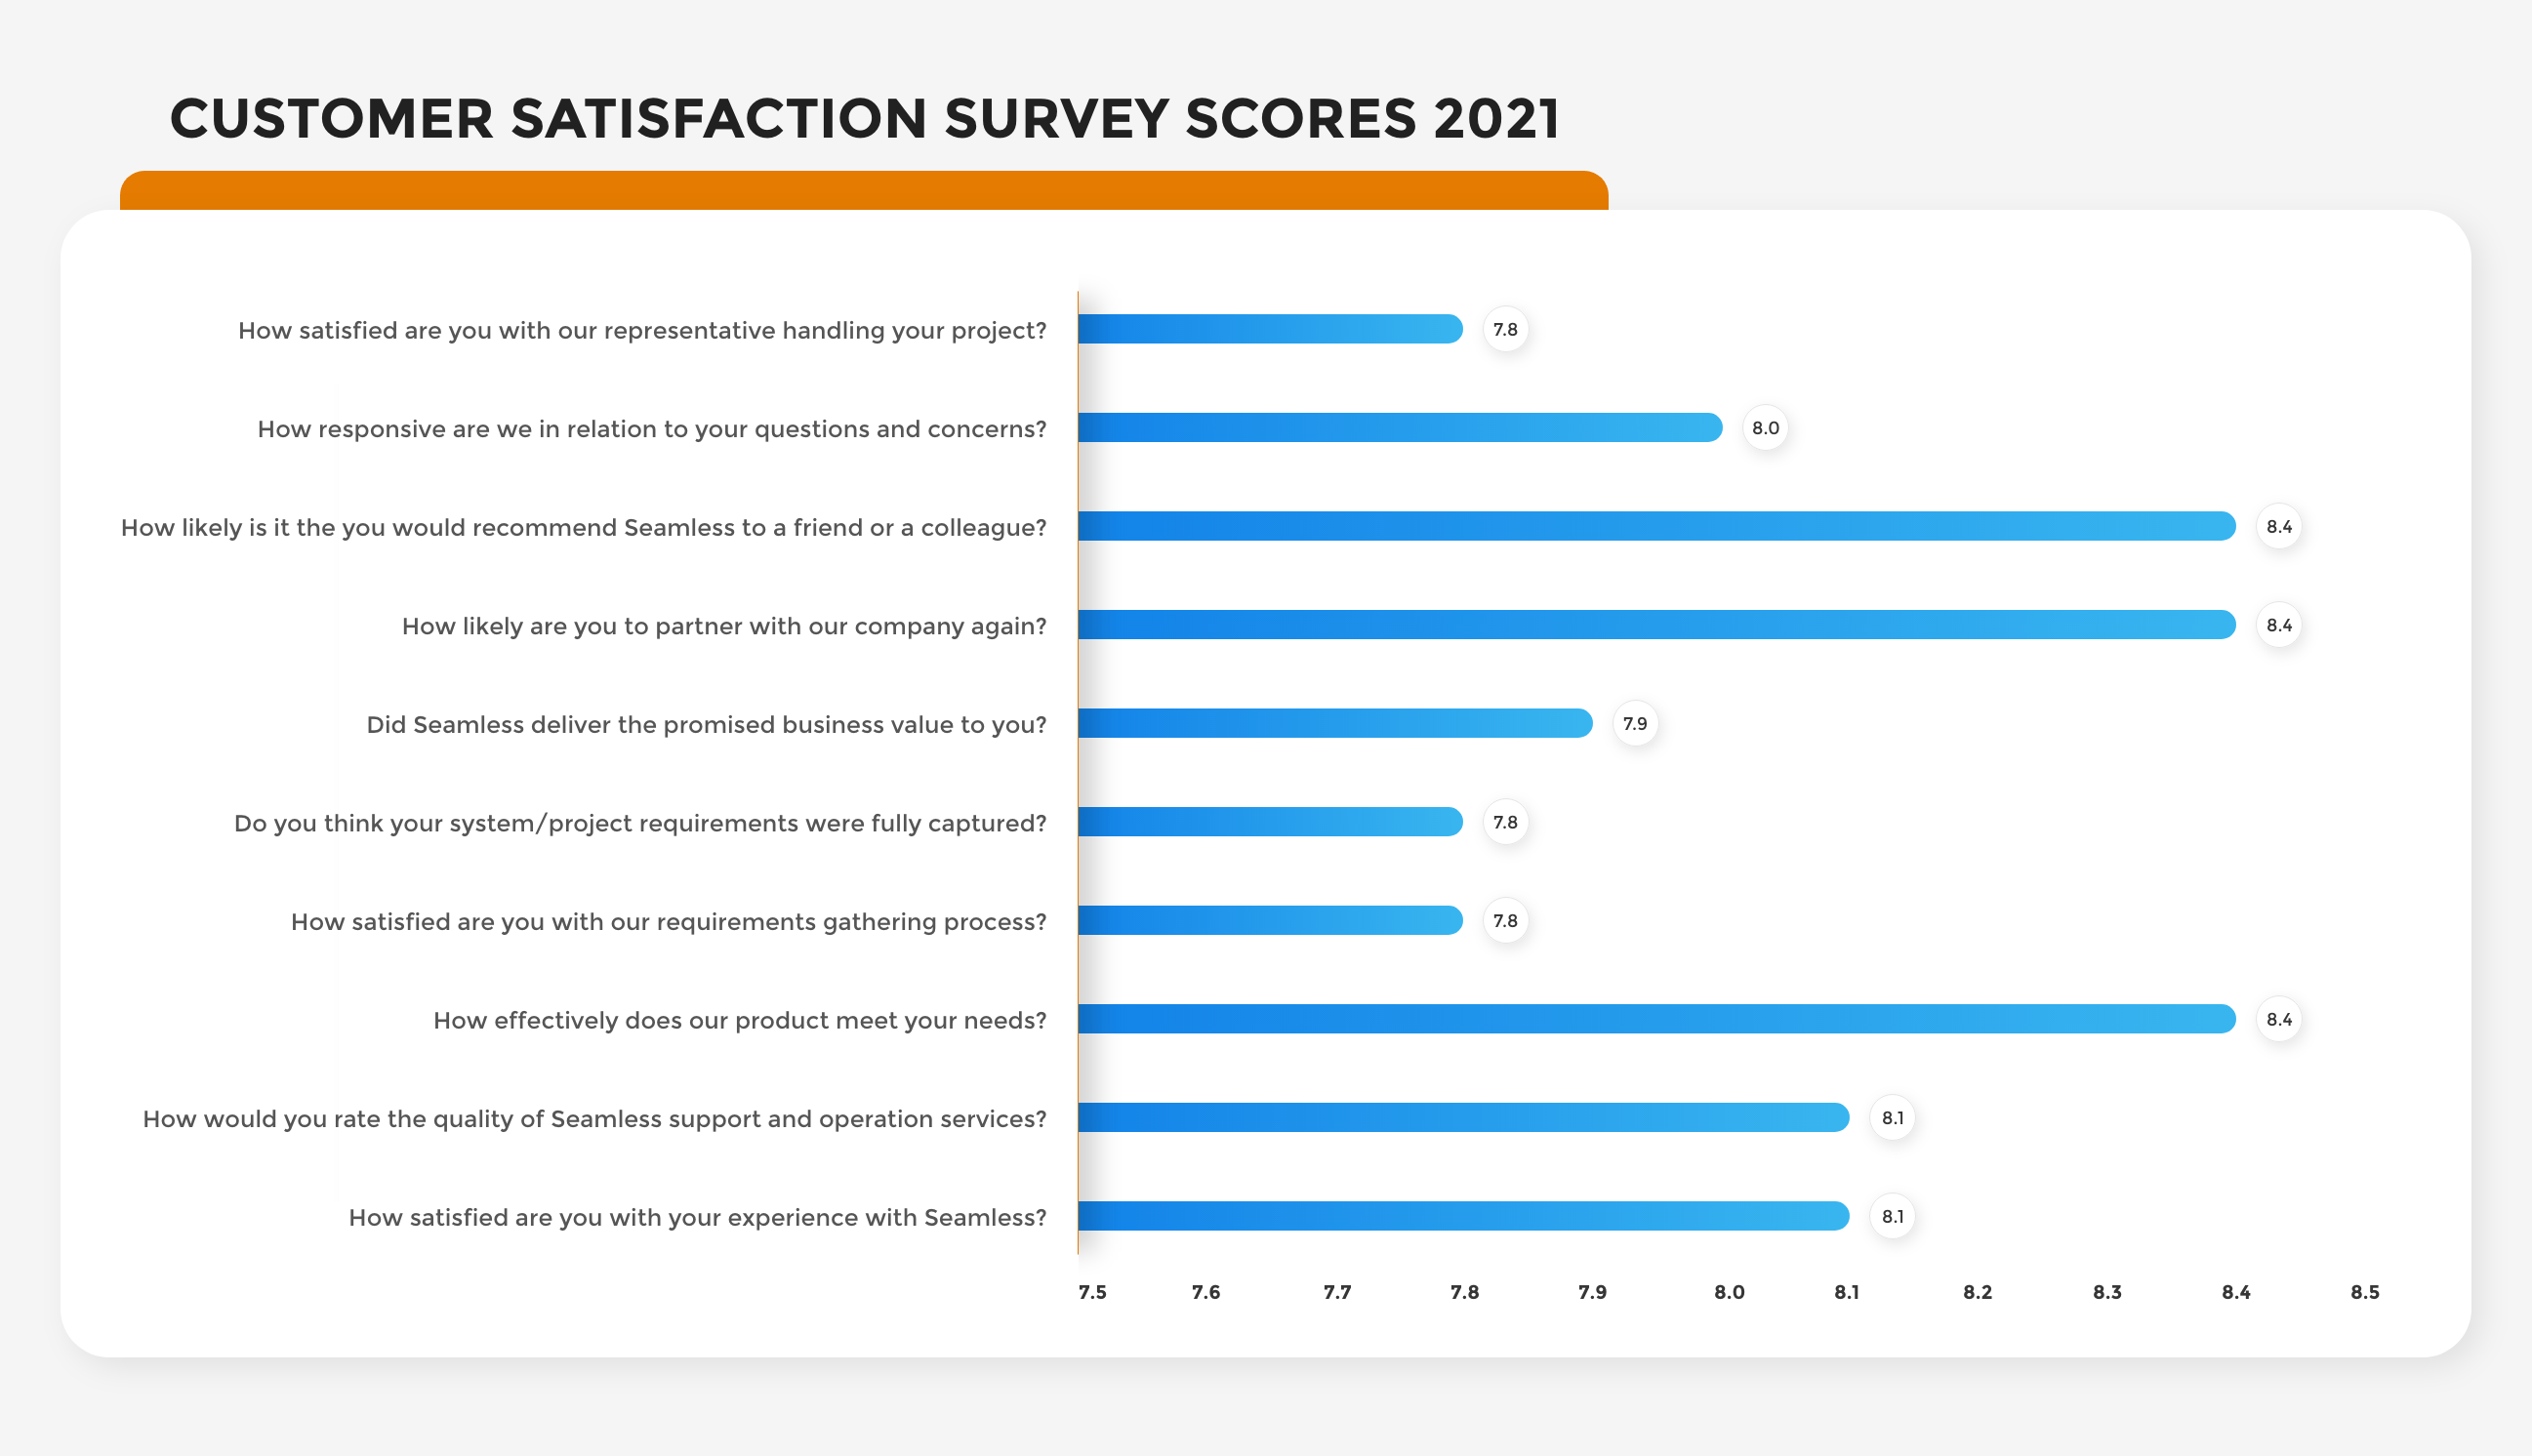 Customer satisfaction survey results 2021 SDS AB.